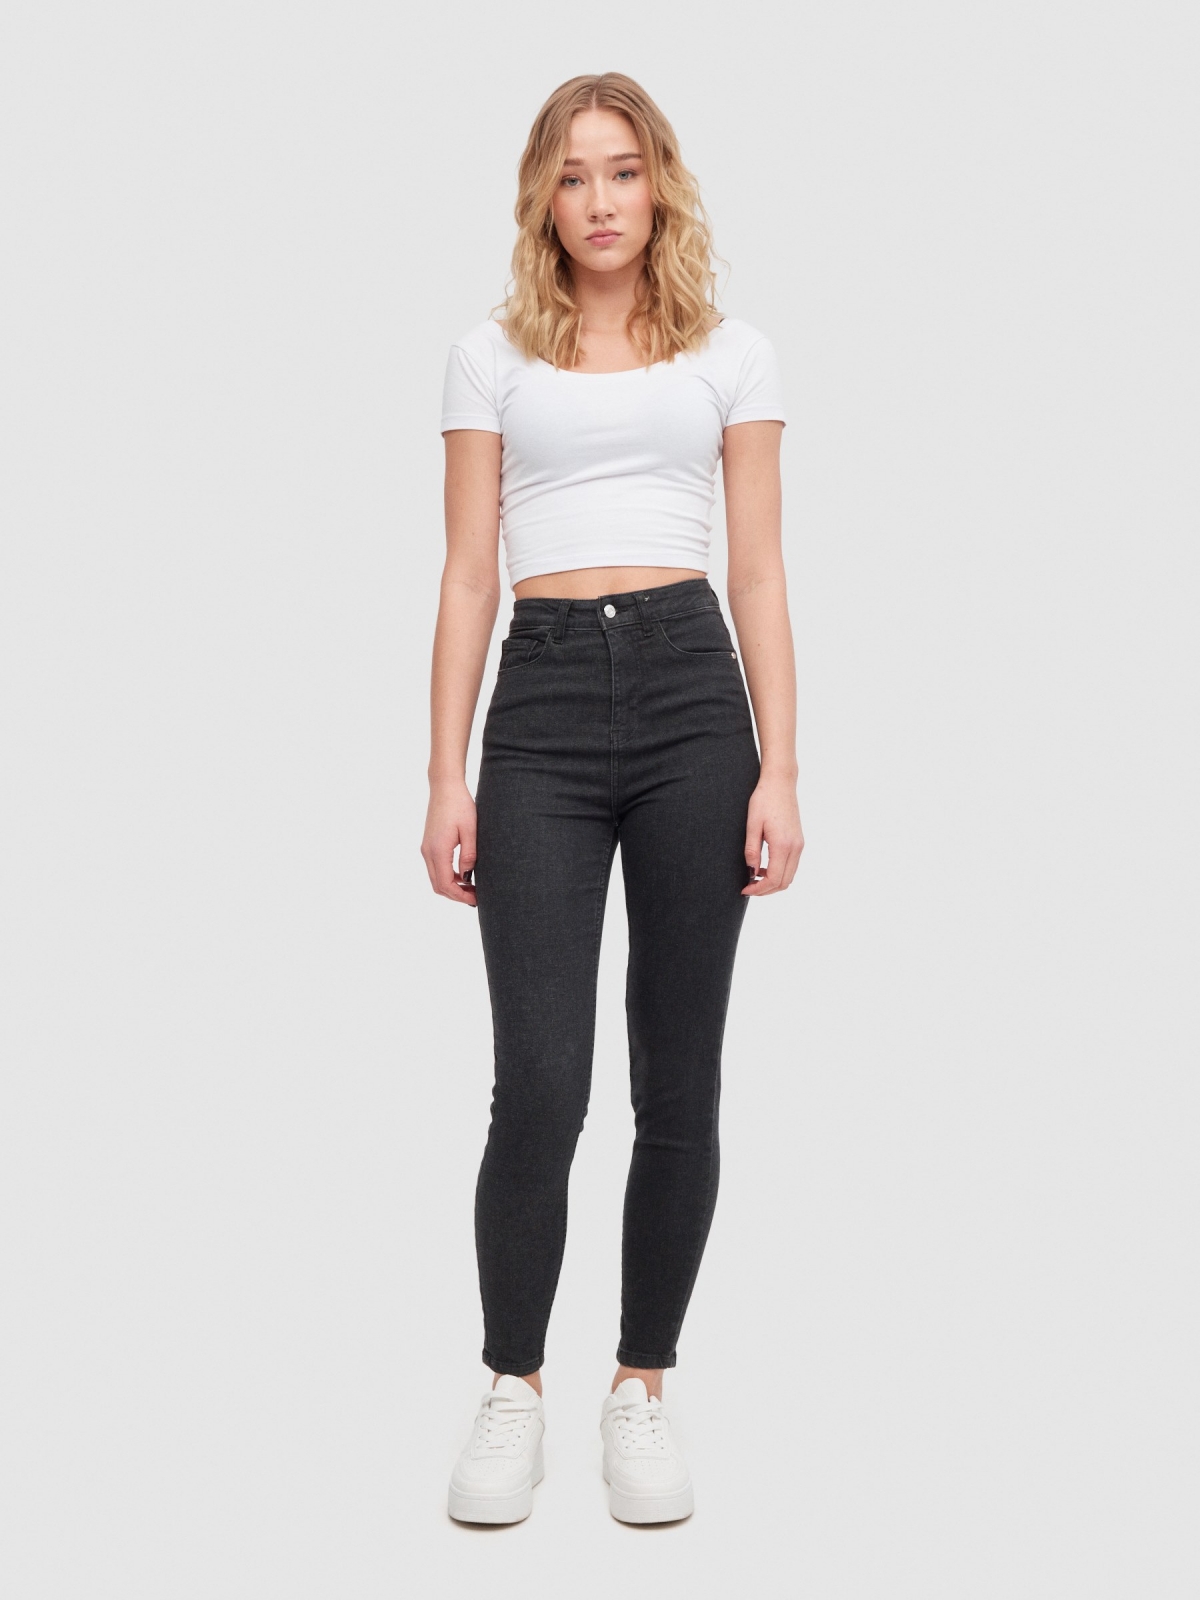 Black skinny jeans high rise black front view